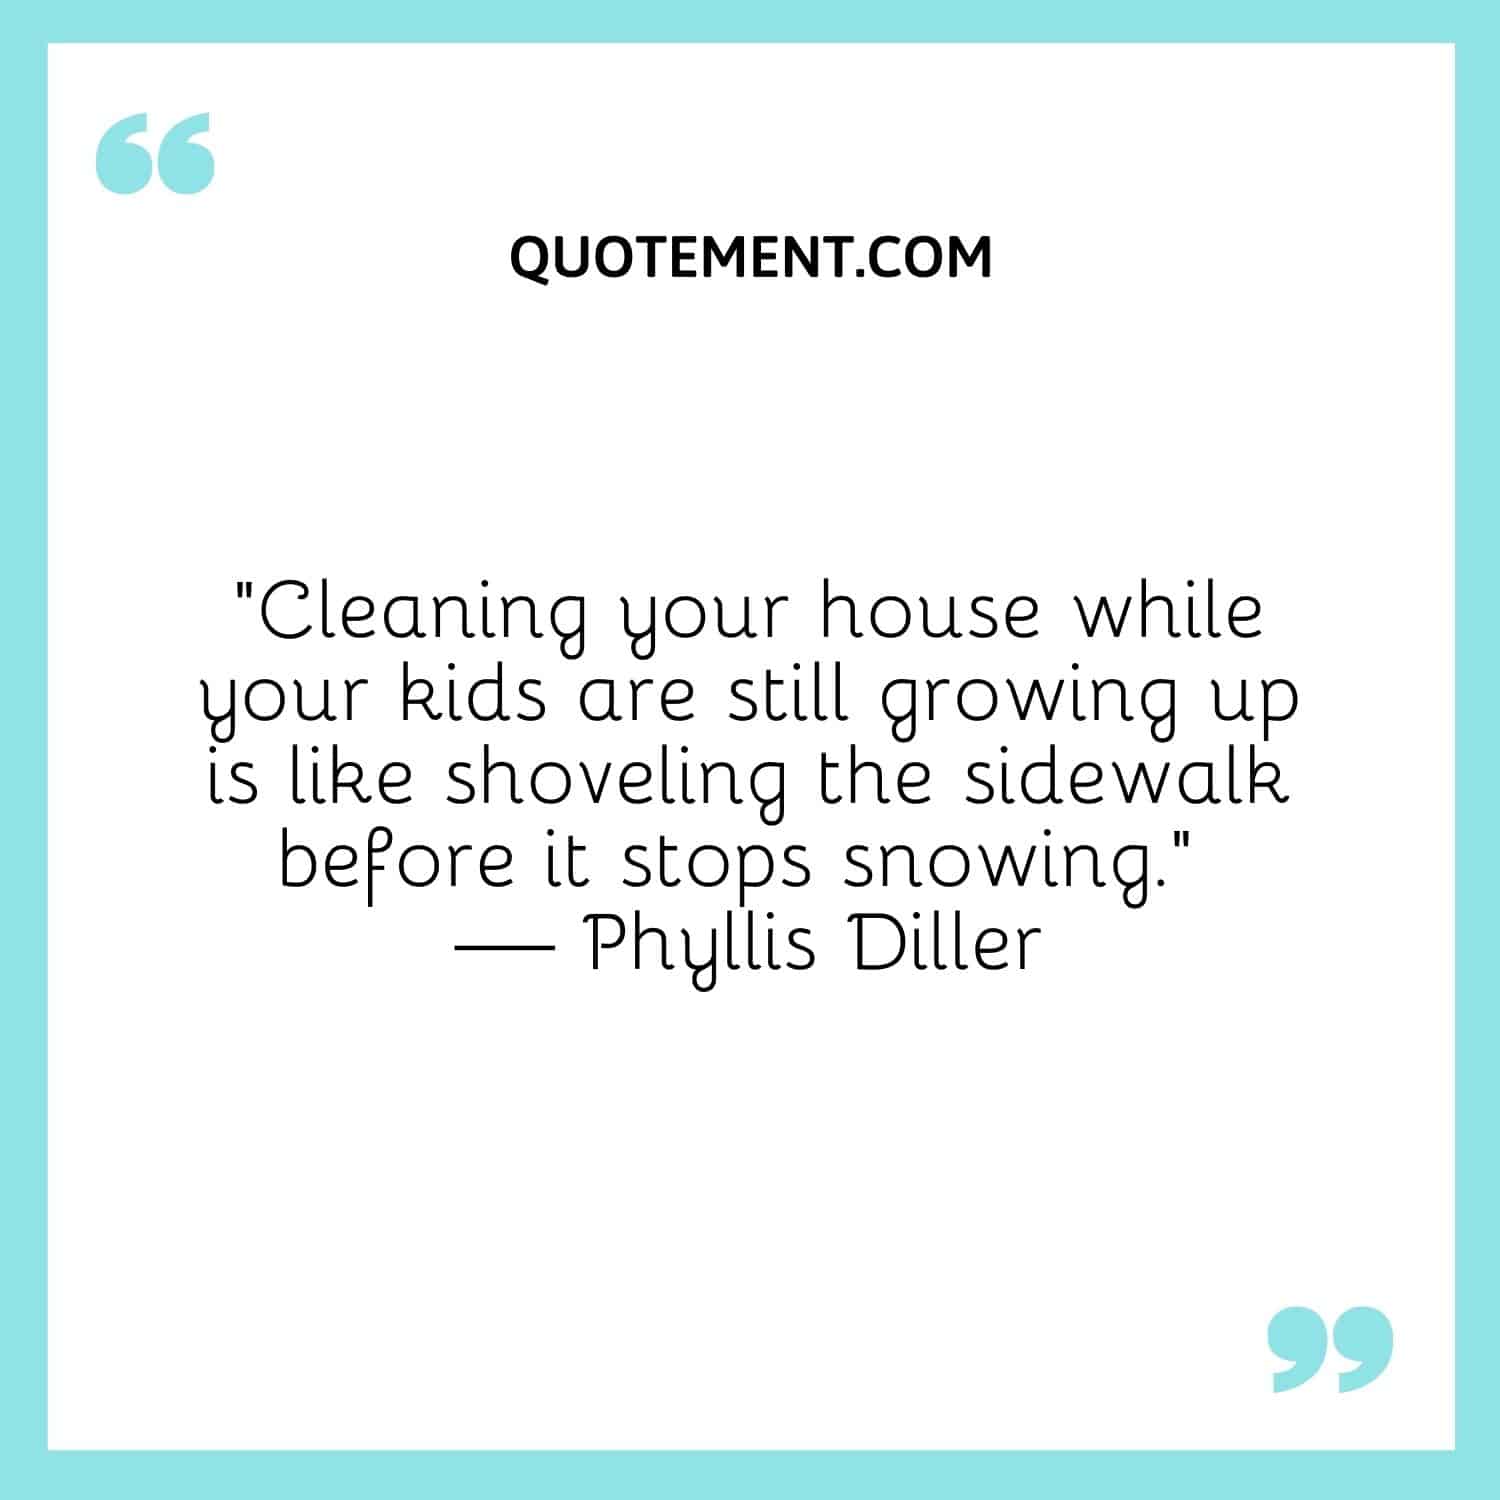 “Cleaning your house while your kids are still growing up is like shoveling the sidewalk before it stops snowing.” — Phyllis Diller